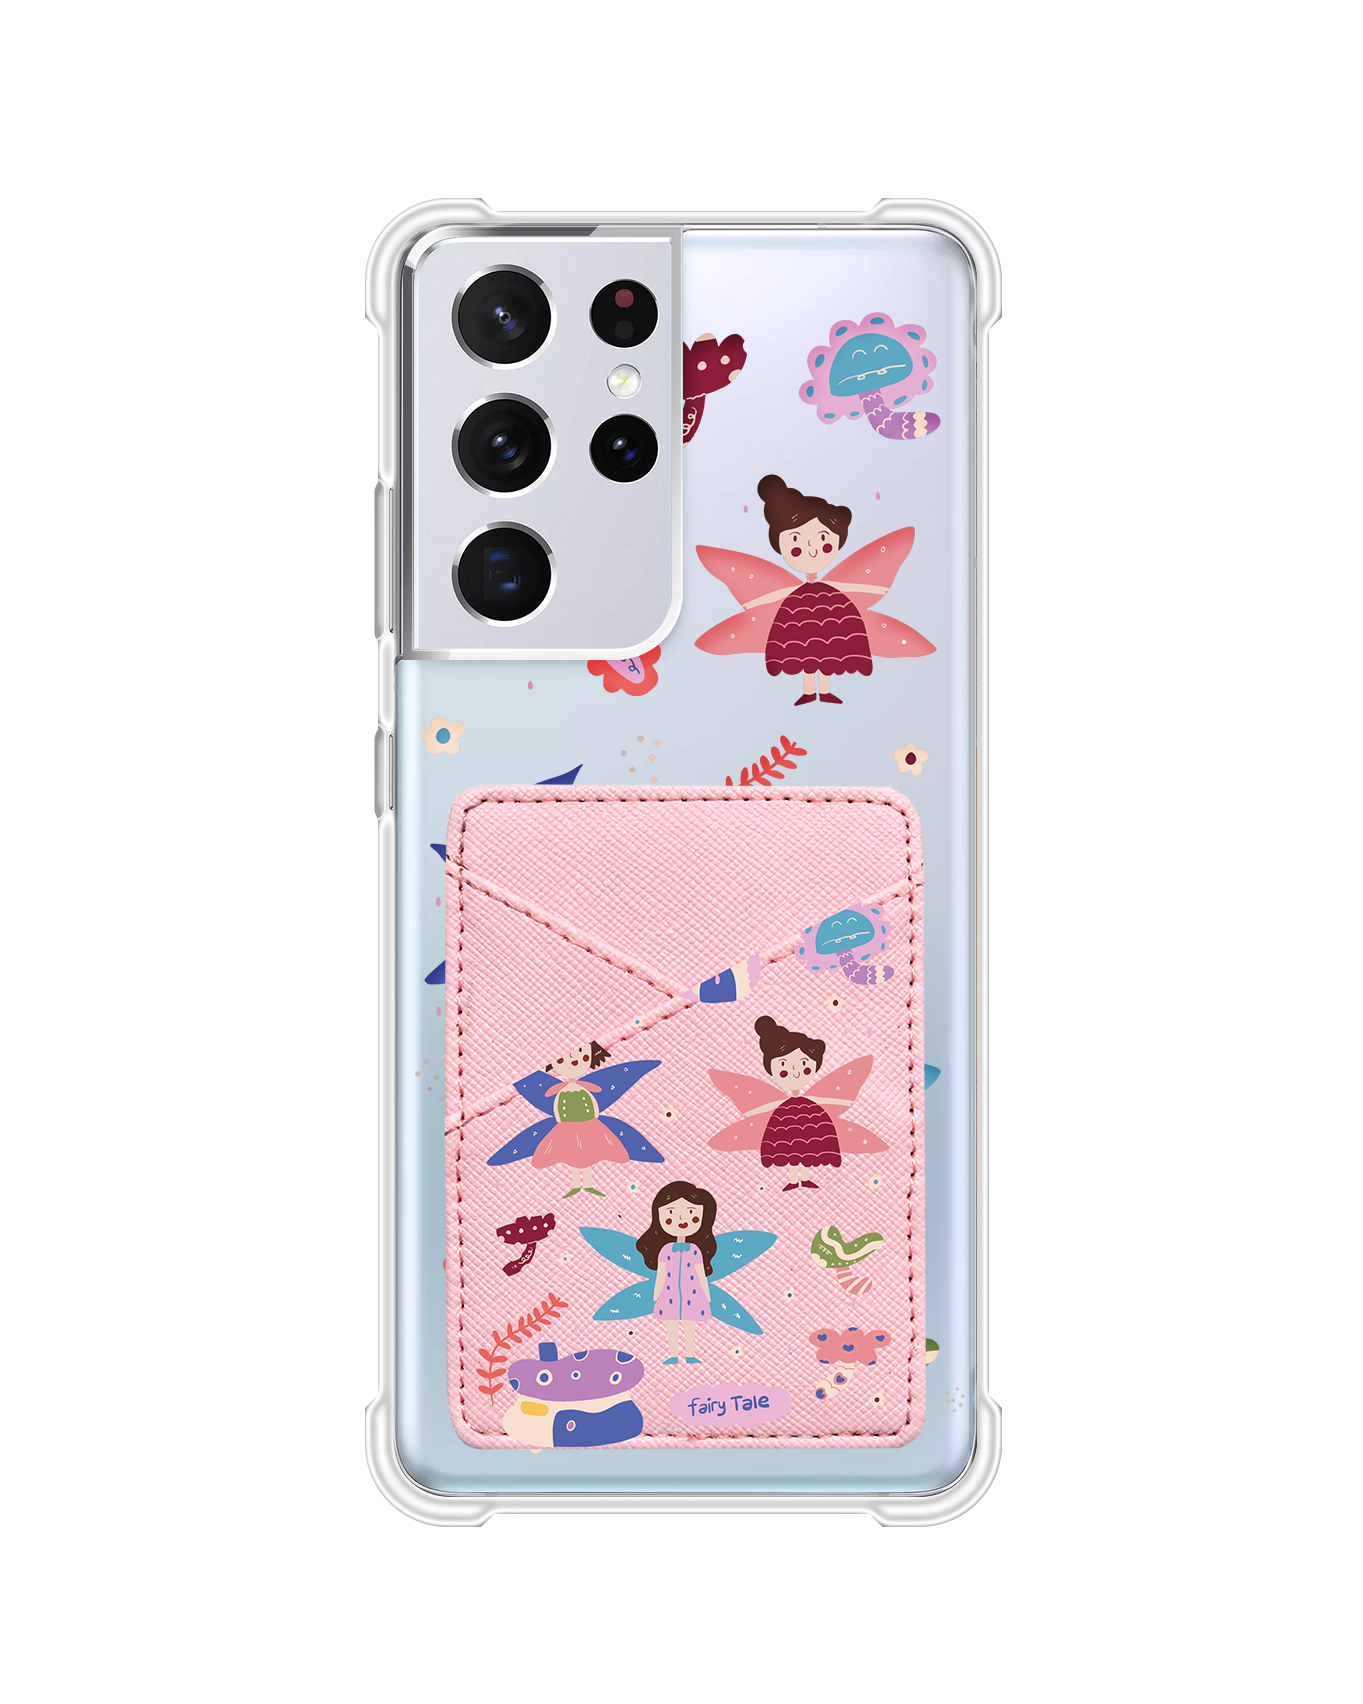 Android Phone Wallet Case - Fairytale